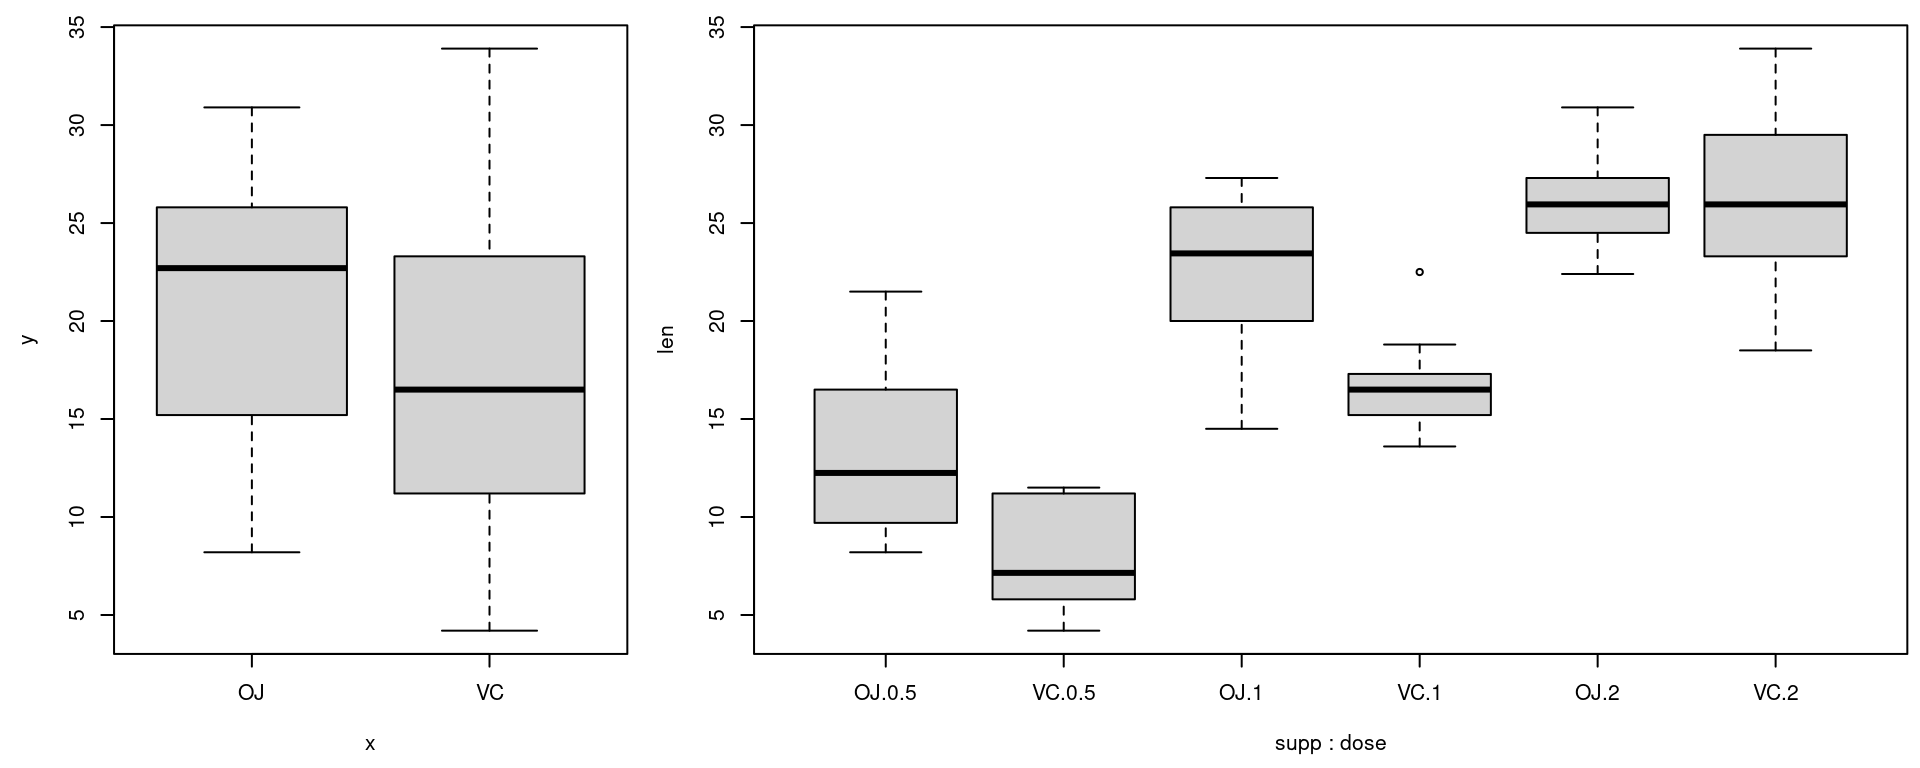 Box plot with base graphics (left); With multiple grouping variables (right)